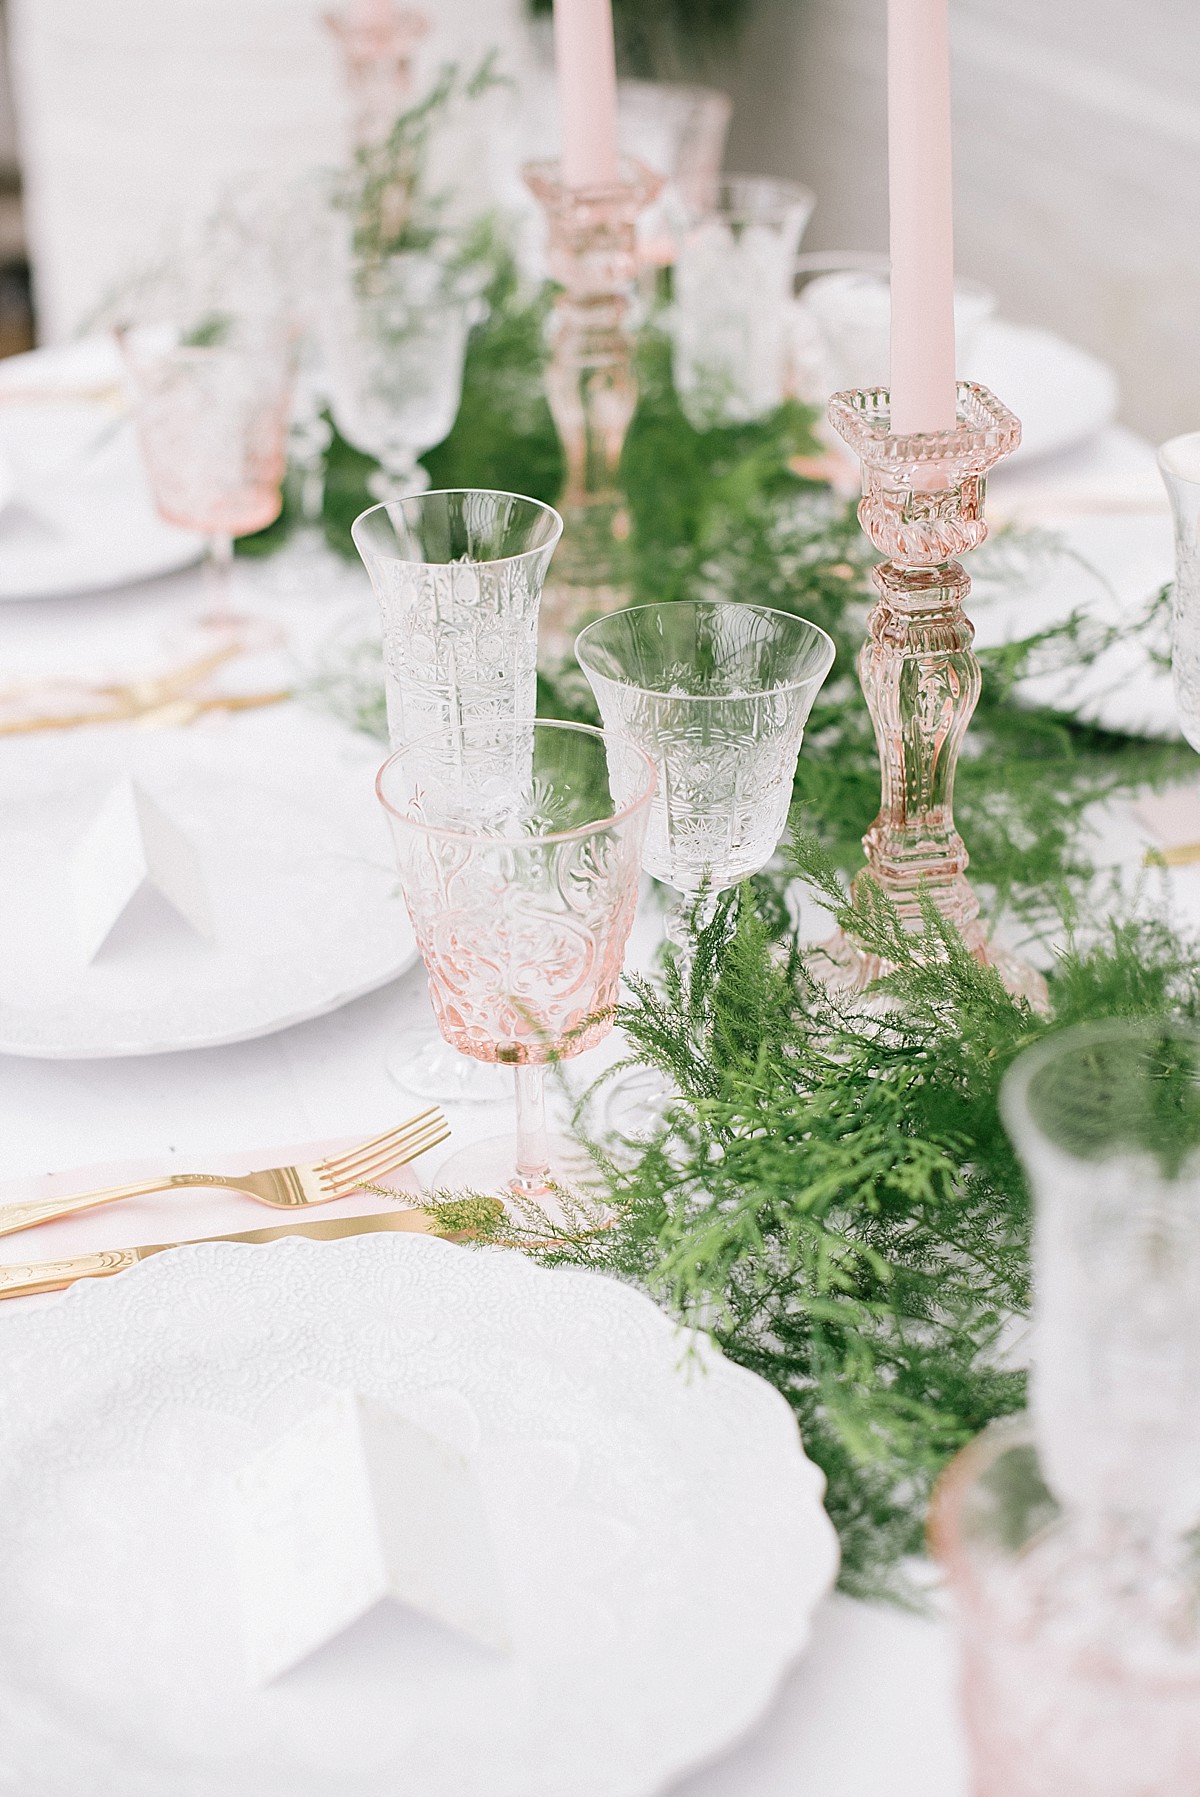 Leafy green, gold and ‘elegant luxe’ inspiration for brides. Shoot styling + concept by The Wedding Bazaar, film photography by Georgina Harrison.